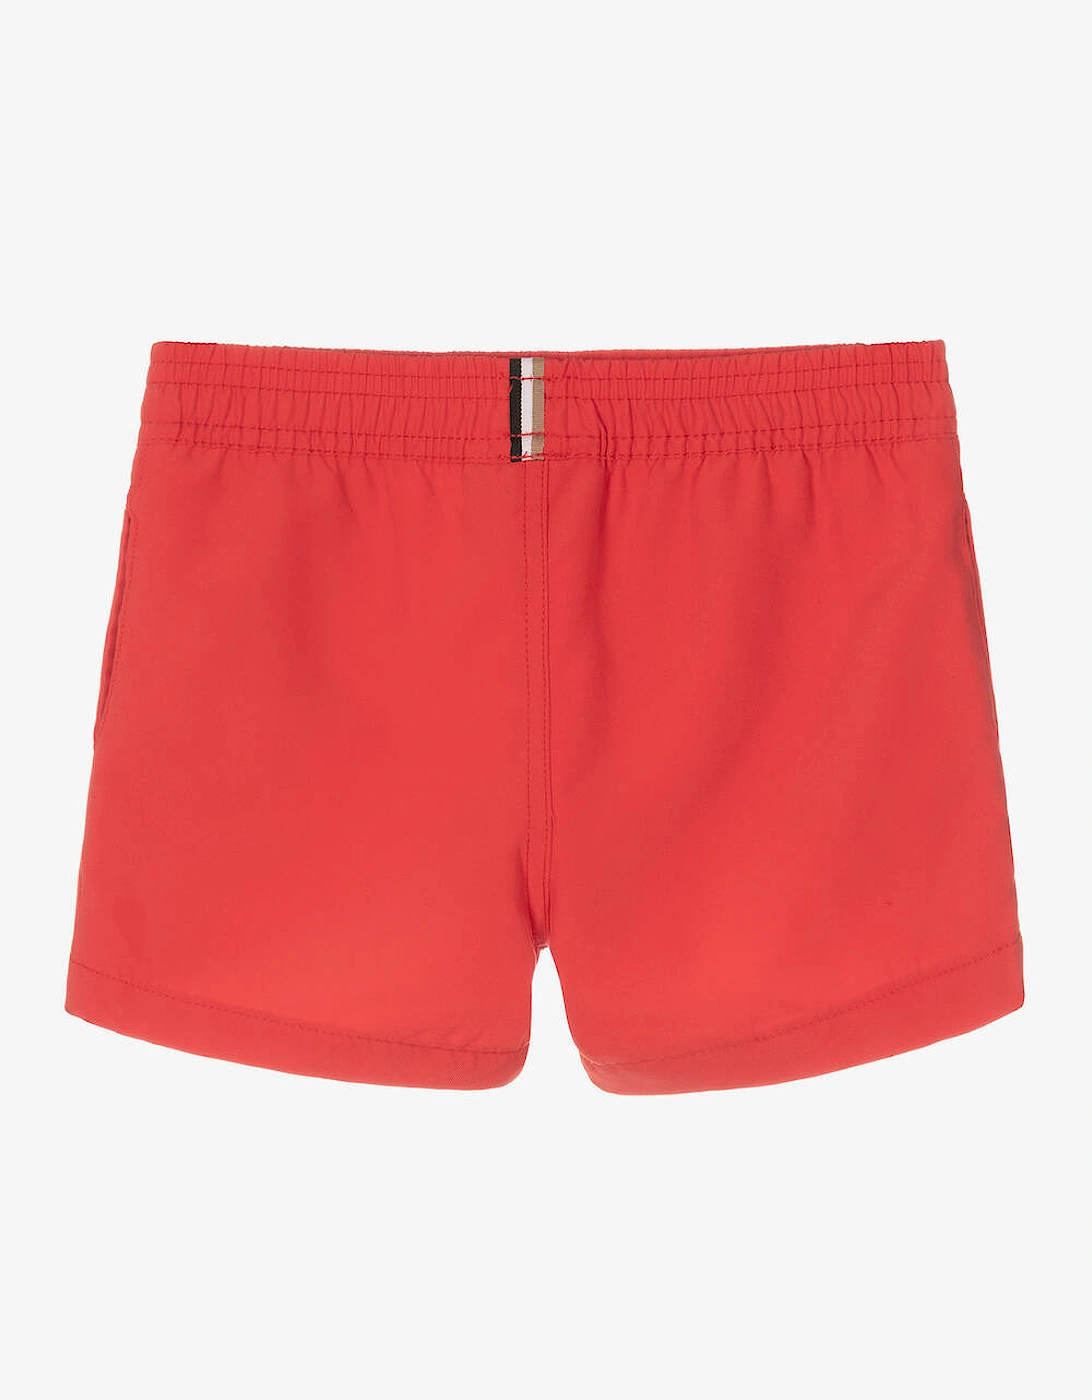 BABY/TODDLER BRIGHT RED SWIMSHORTS